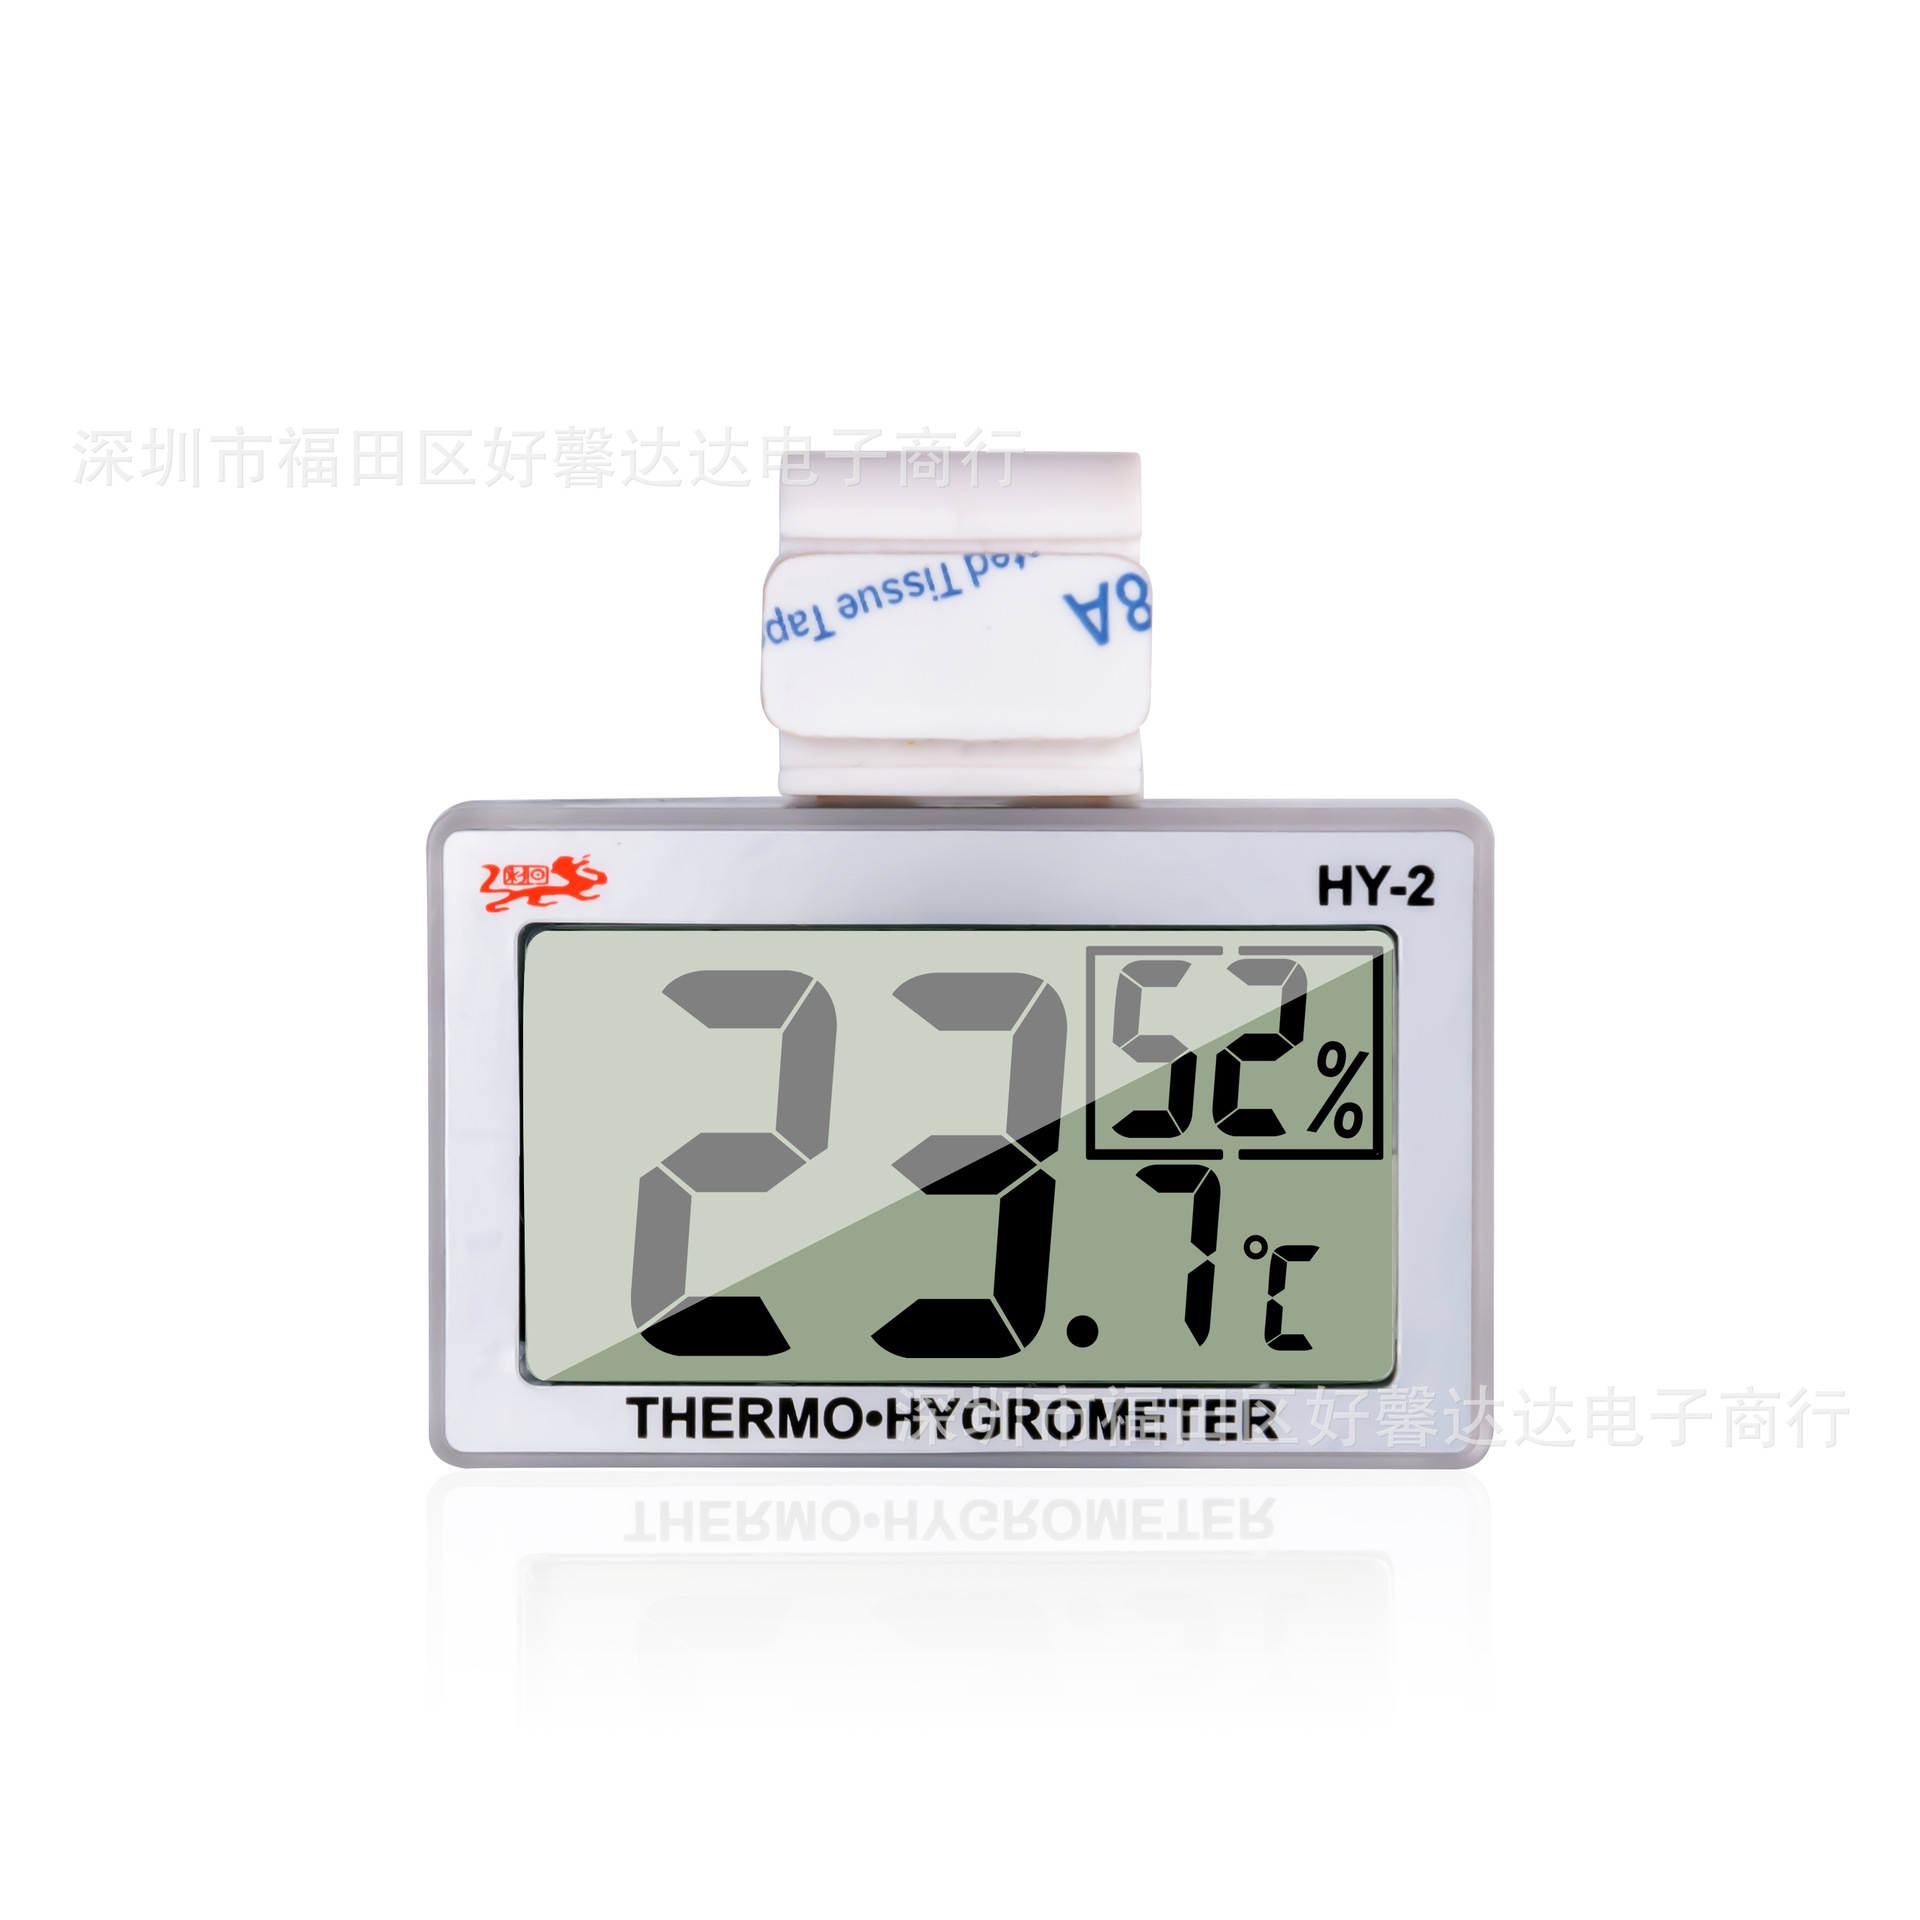 HY-2 high-precision Hanging type kitchen Refrigerator thermometer digital display Temperature and humidity meter indoor thermometer